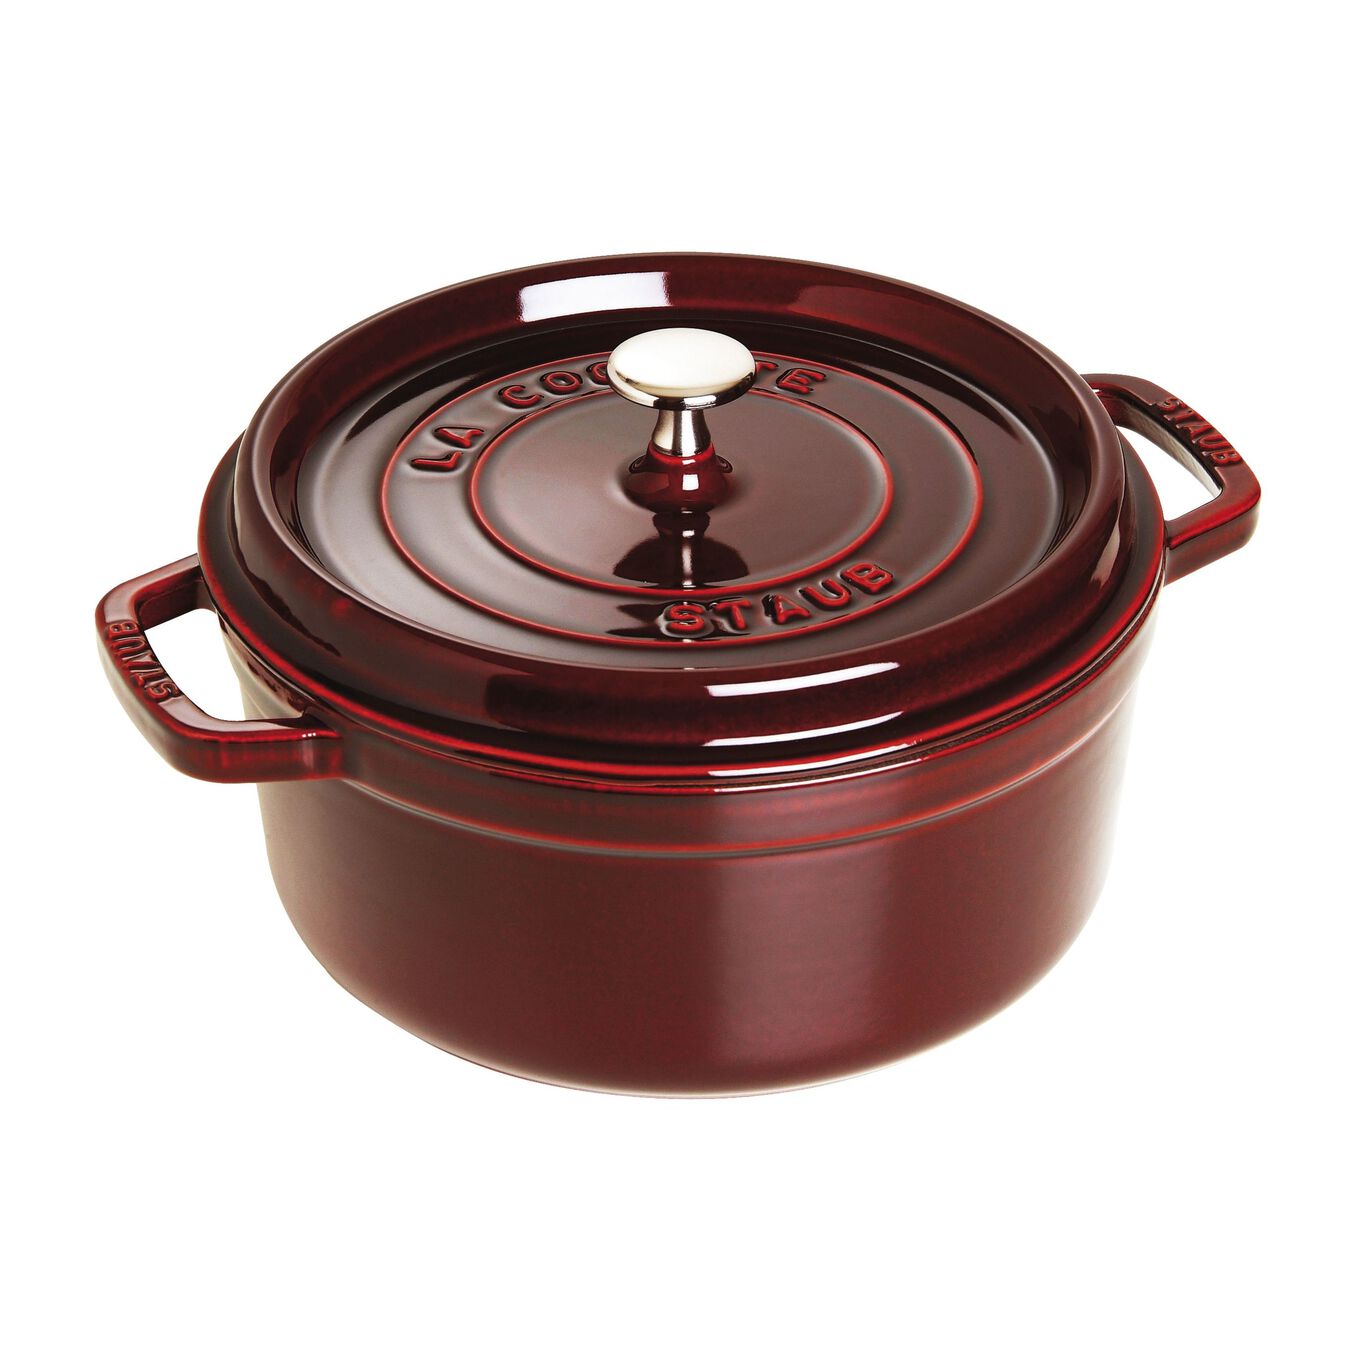 5.25 l cast iron round Cocotte, grenadine-red - Visual Imperfections,,large 1